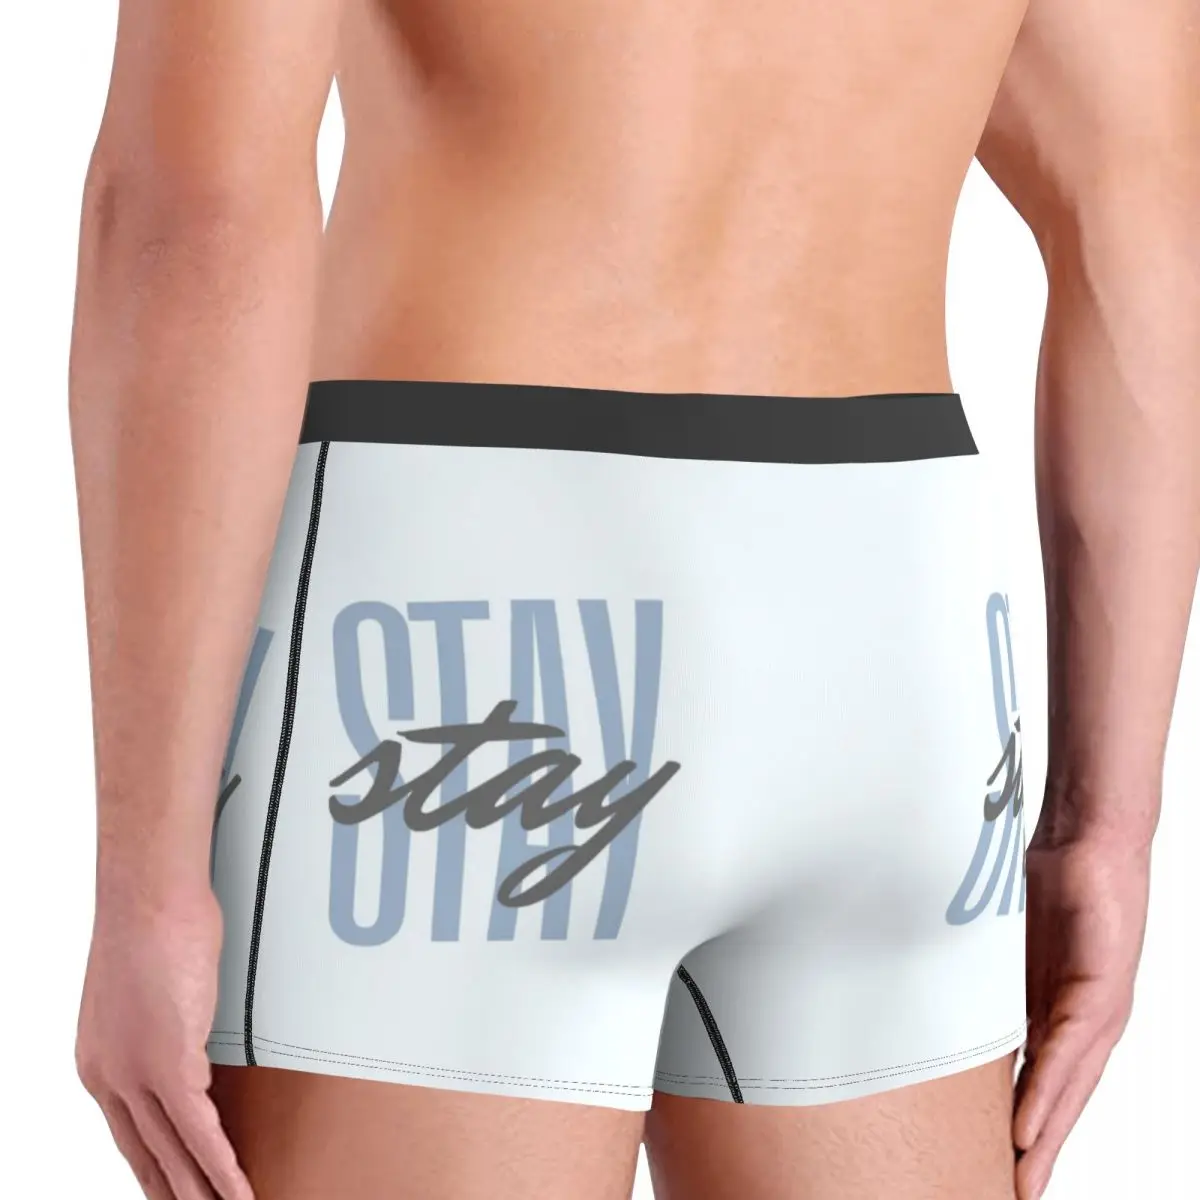 BE Stay Album Music Underwear words cool famous song design Man Shorts  Briefs Classic Trunk Trenky Custom Plus Size Underpants